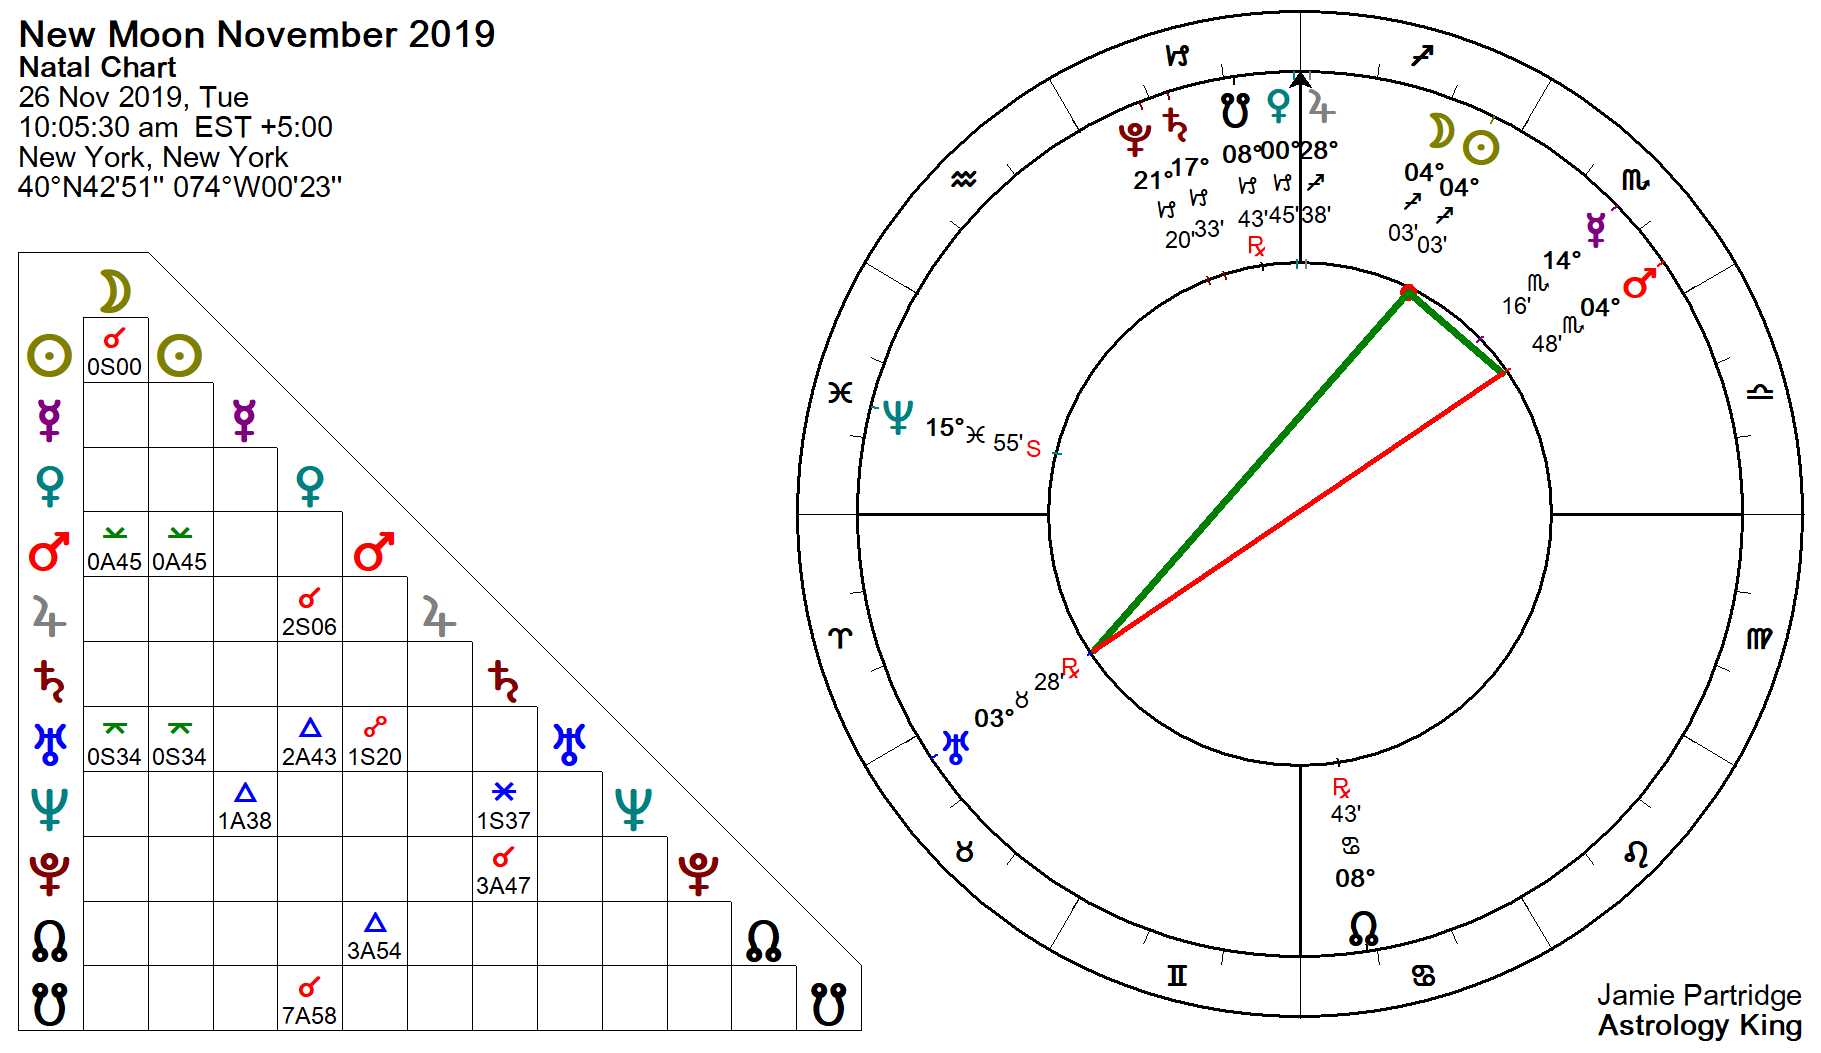 New Moon November 26, 2019 – Winners and Losers – Astrology King